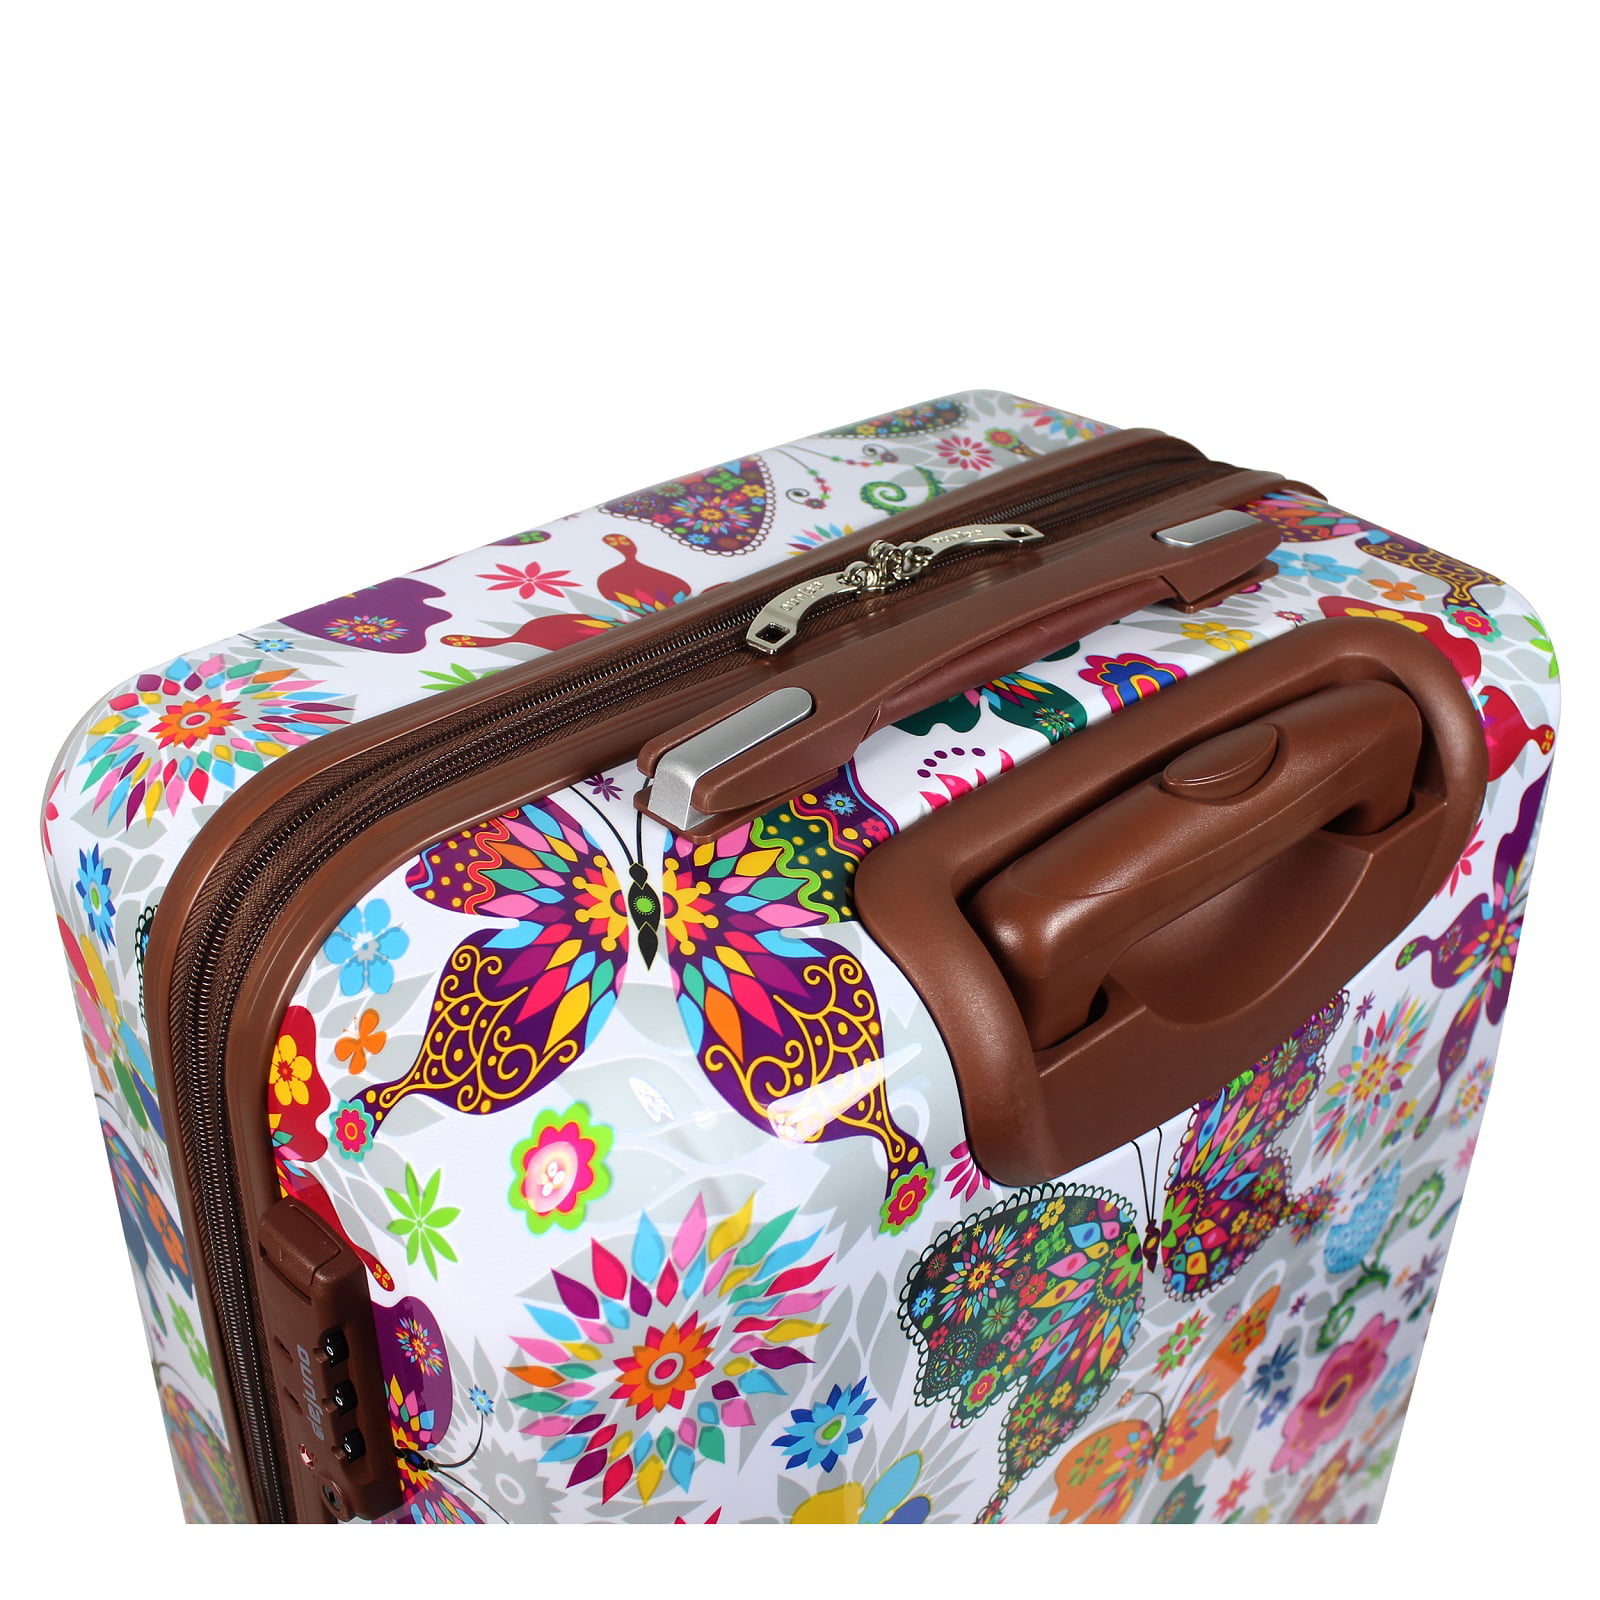 World Traveler Butterfly 2-piece Hardside Carry-on Spinner Luggage Set in  White (As Is Item) - Bed Bath & Beyond - 10783825